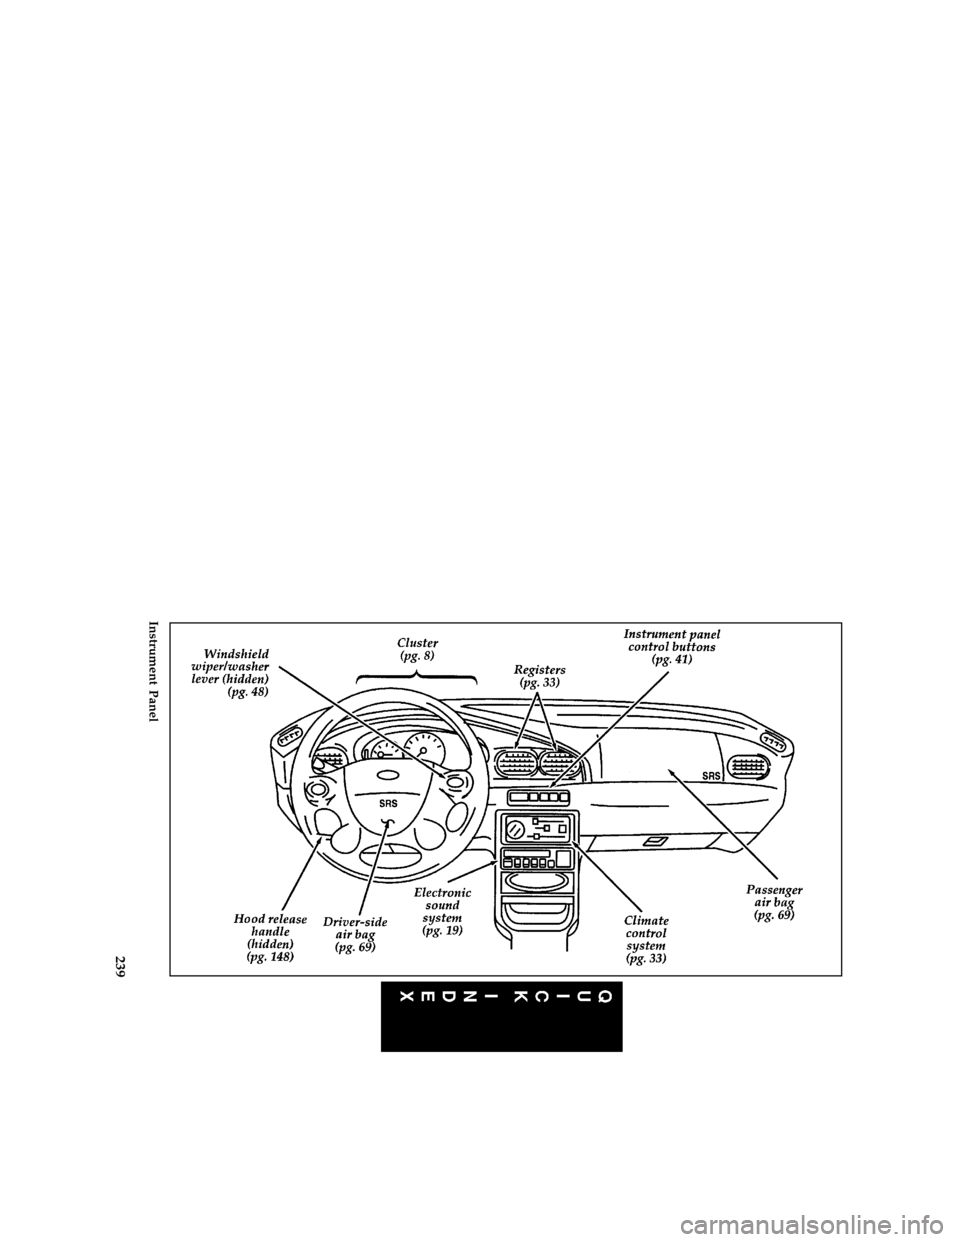 FORD ASPIRE 1997 1.G Owners Manual 239 [QI01400(ALL)04/96]
full page art:0032144-I
Instrument Panel
File:16icqif.ex
Update:Tue Mar  4 08:59:23 1997 